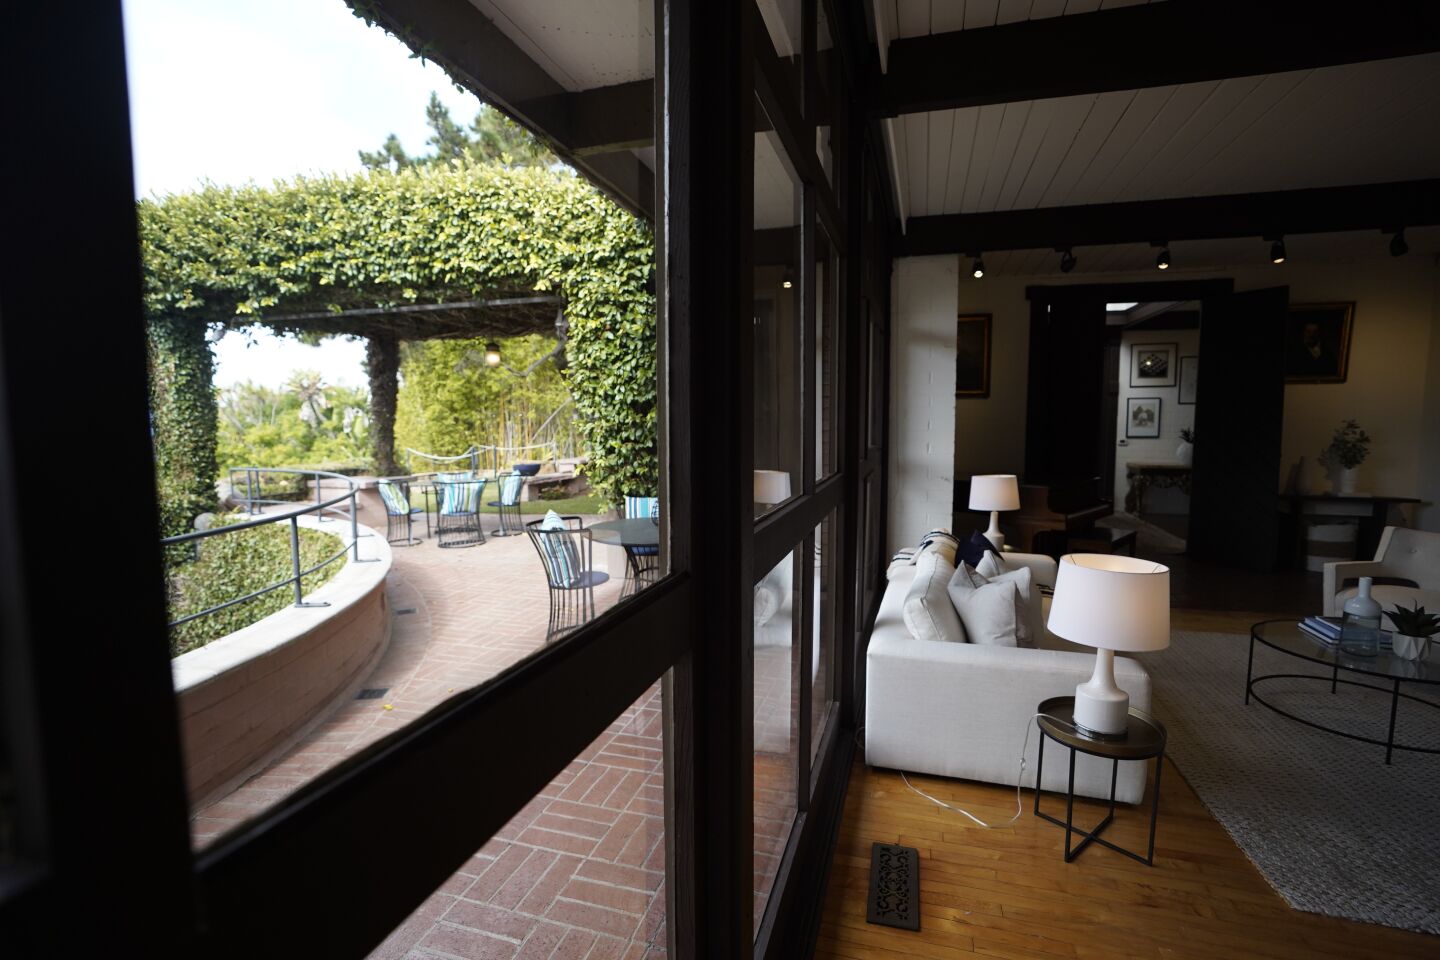 San Diego, California - December 02: The historic home of oceanographer Walter Munk. Inside the living room area looking towards the back yard at La Jolla Shores on Thursday, Dec. 2, 2021 in San Diego, California. (Alejandro Tamayo / The San Diego Union-Tribune)